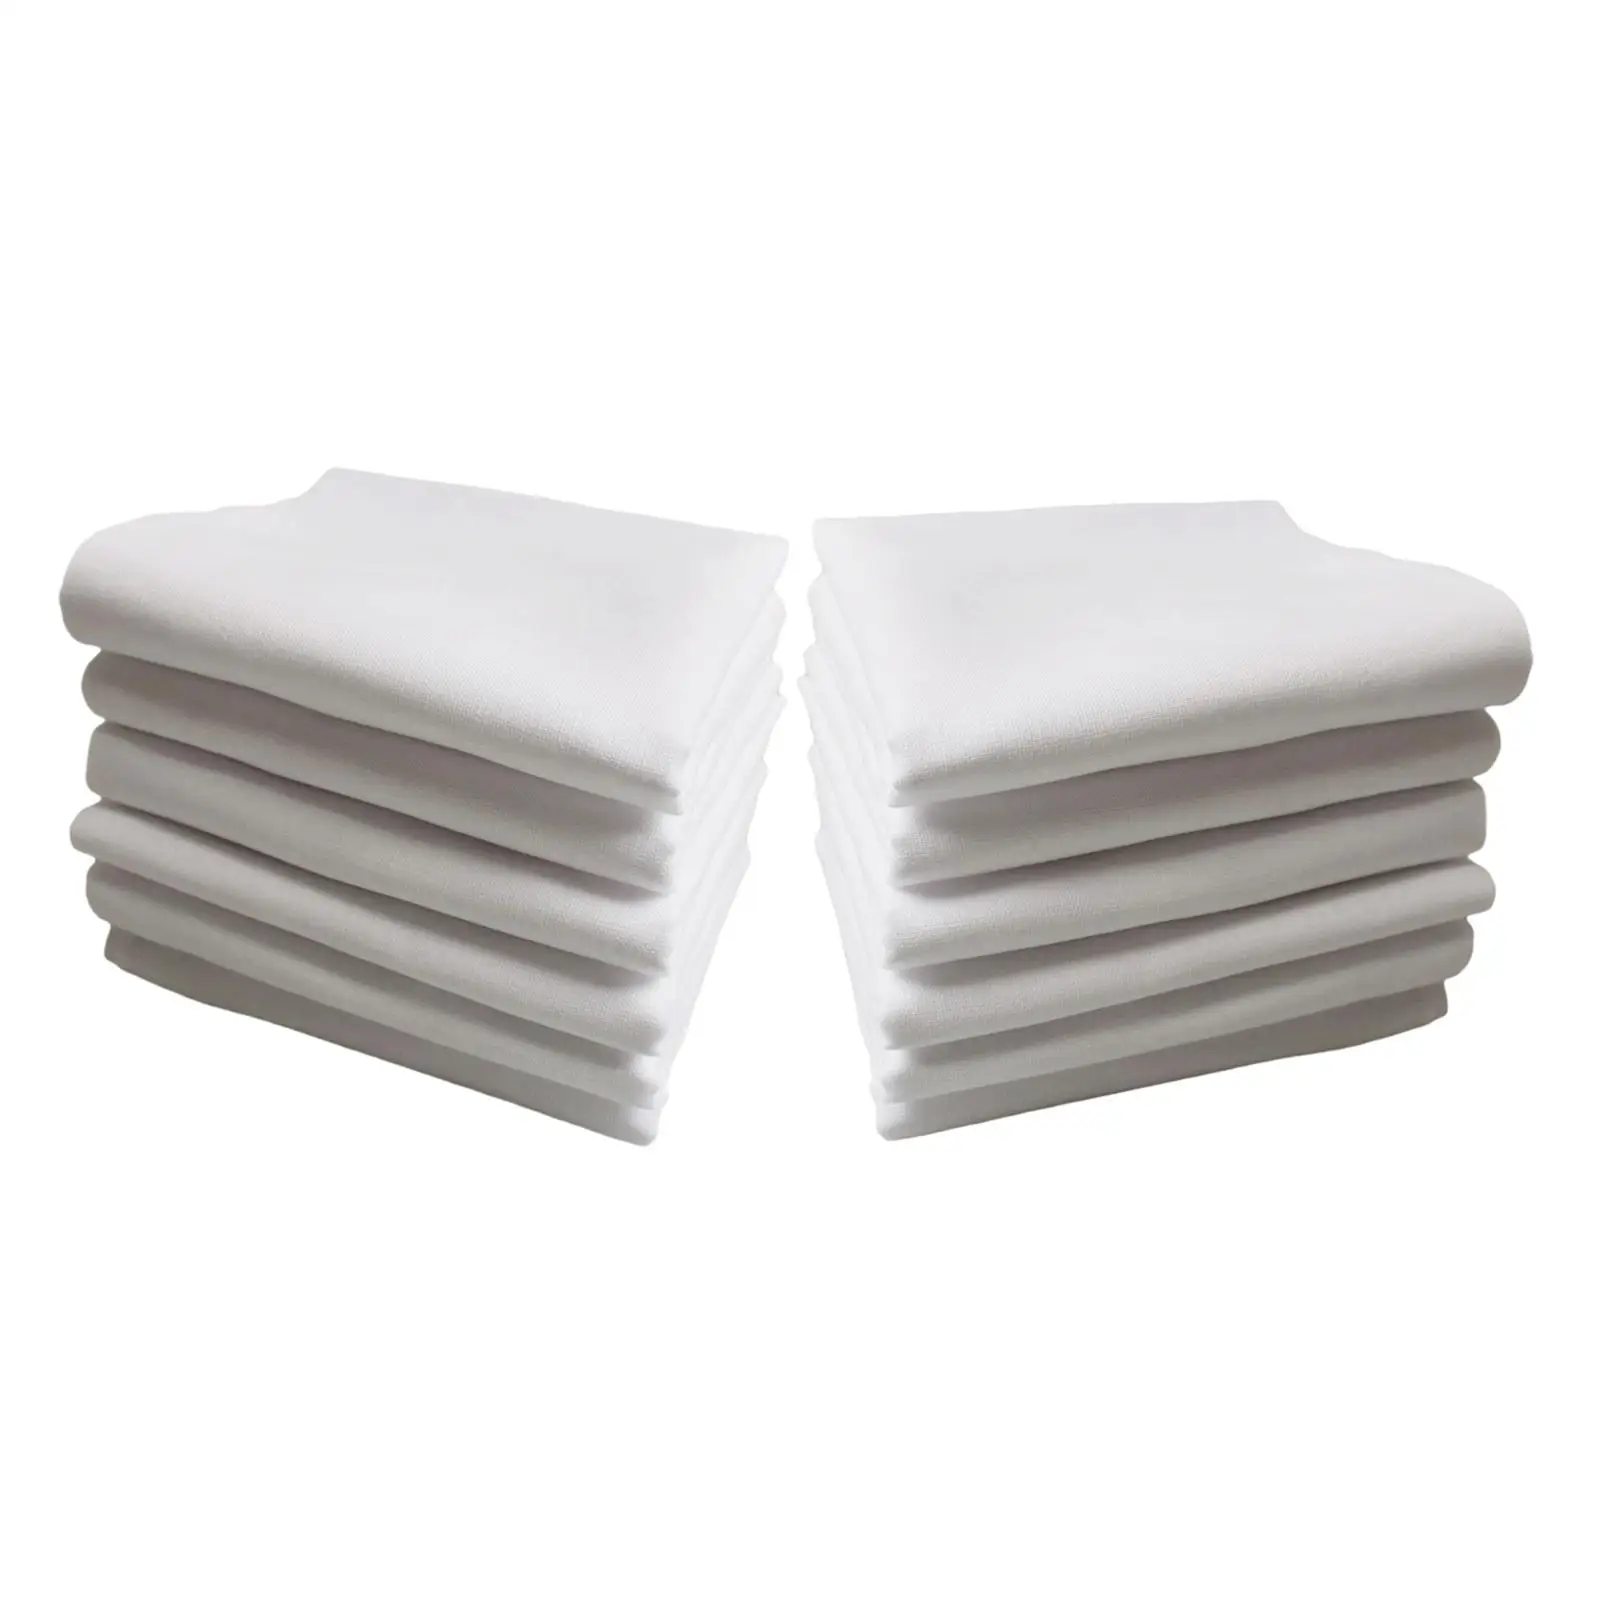 

12x Solid White Handkerchiefs Classic Hankies DIY Pocket Square for Everyday Use